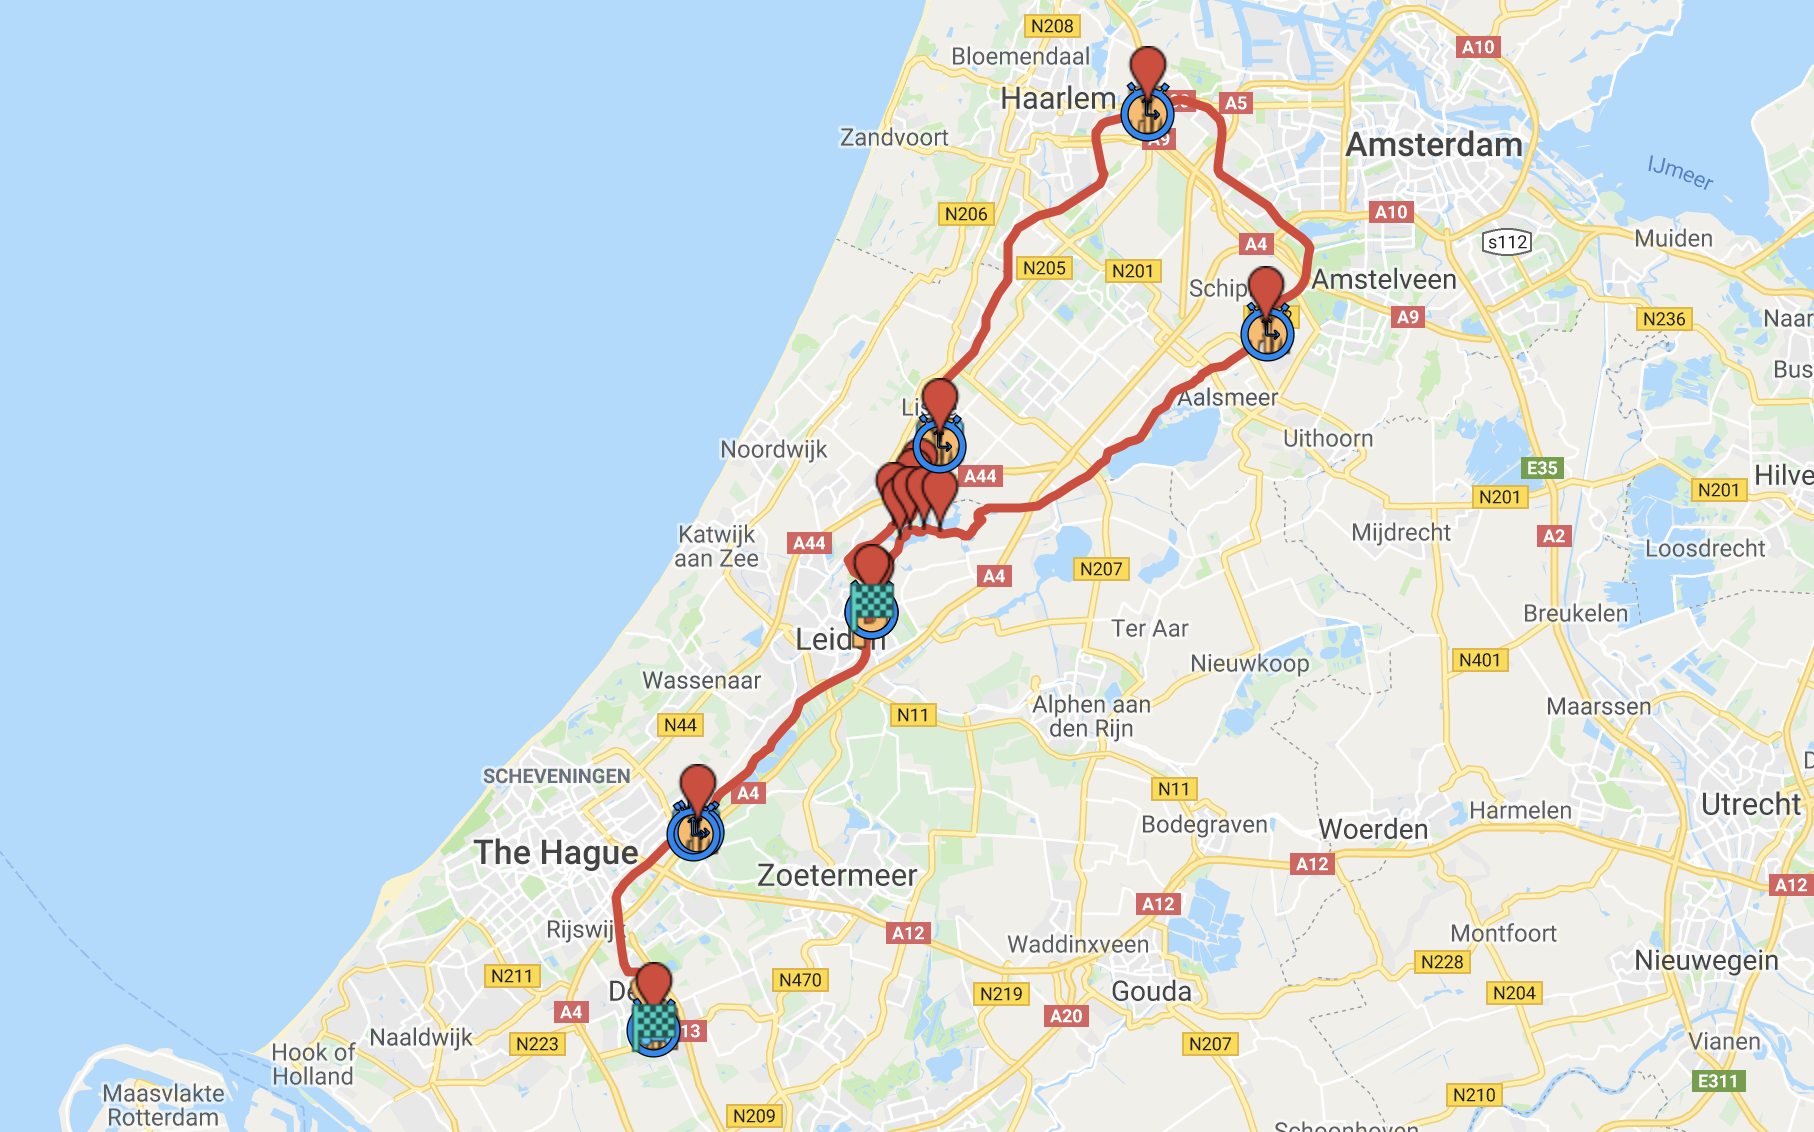 The route of the 2018 Ringvaart, starting in Leiden and passing by Schiphol, Amsterdam, Haarlem, Kaag, Leiden and Leidschendam, and finishing in Delft. (Google Maps; route description; archived version)